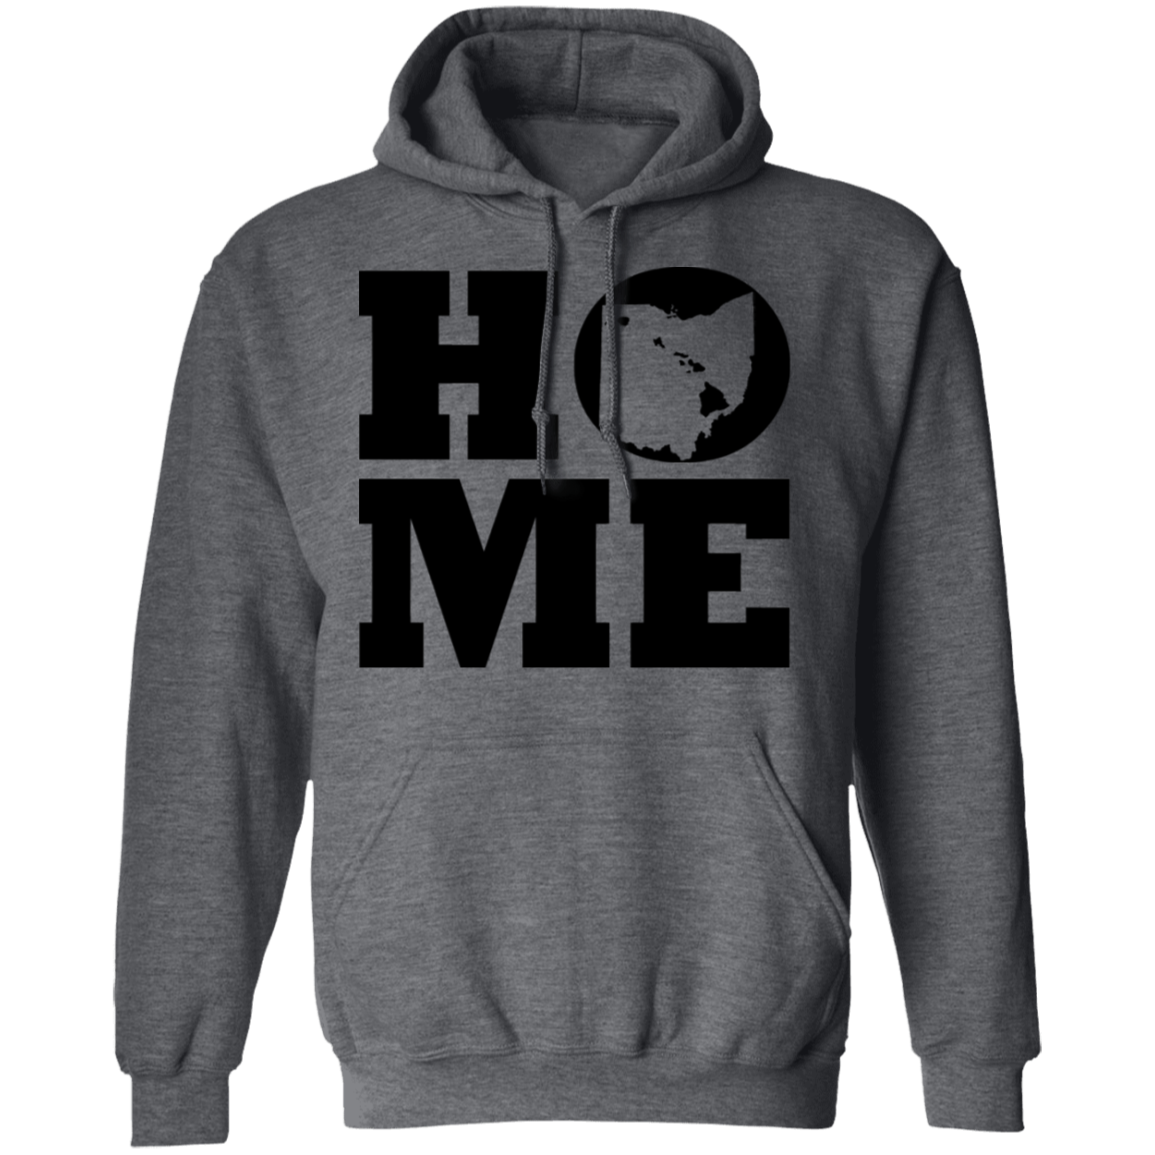 Home Roots Hawai'i and Ohio Pullover Hoodie